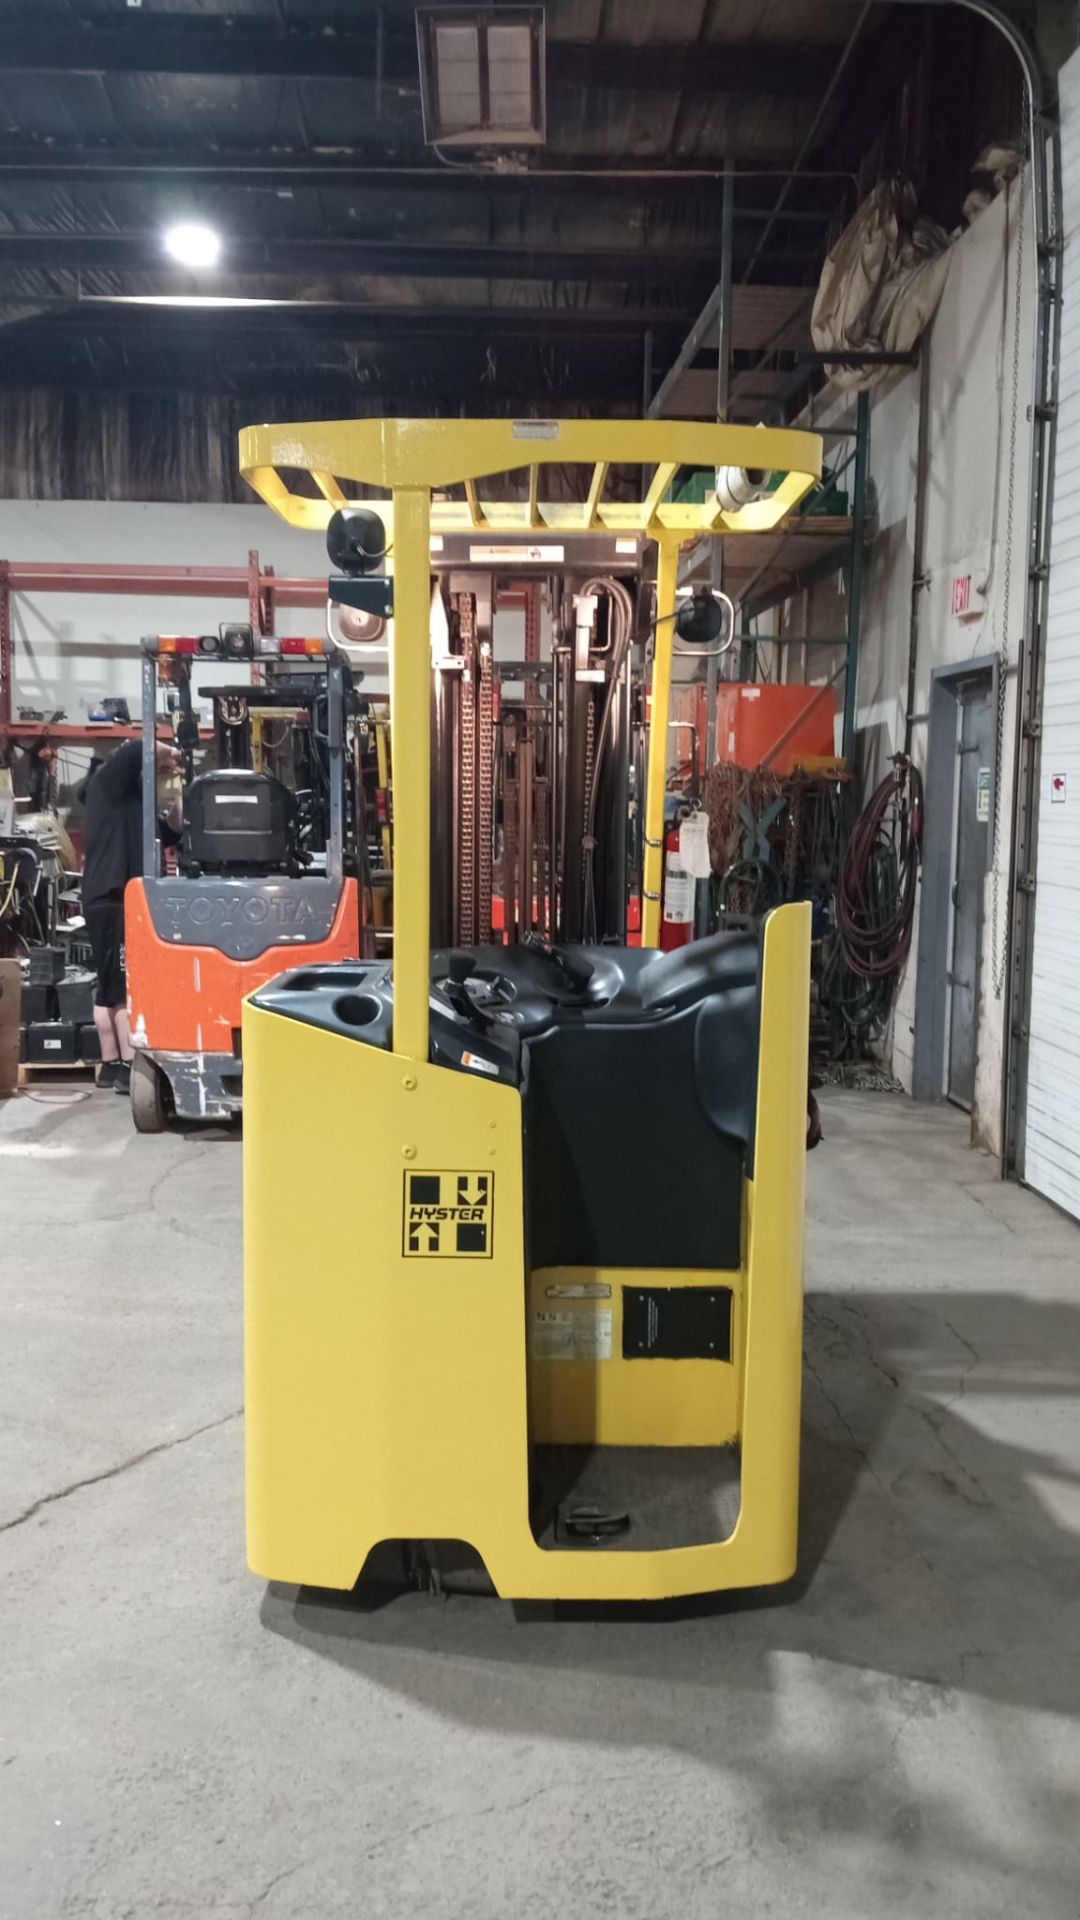 2014 Hyster 3,500lbs Capacity Electric Stand On Forklift 4-STAGE MAST 36V with sideshift - FREE - Image 4 of 6